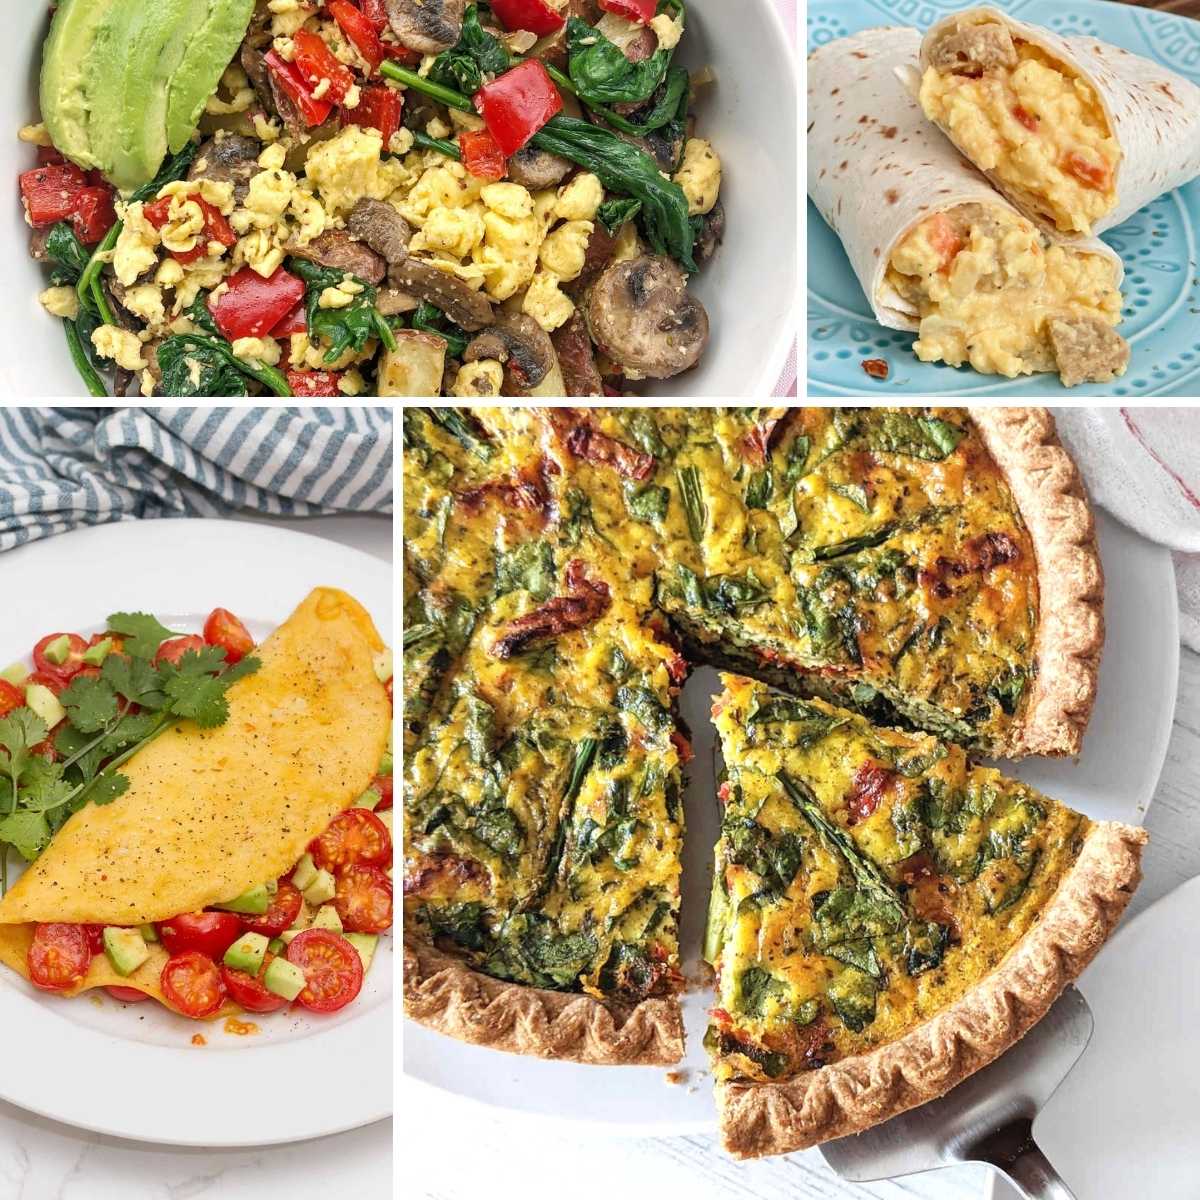 Collage of four Just Egg recipes including quiche, breakfast burritos, vegan omelette, and vegan breakfast hash.